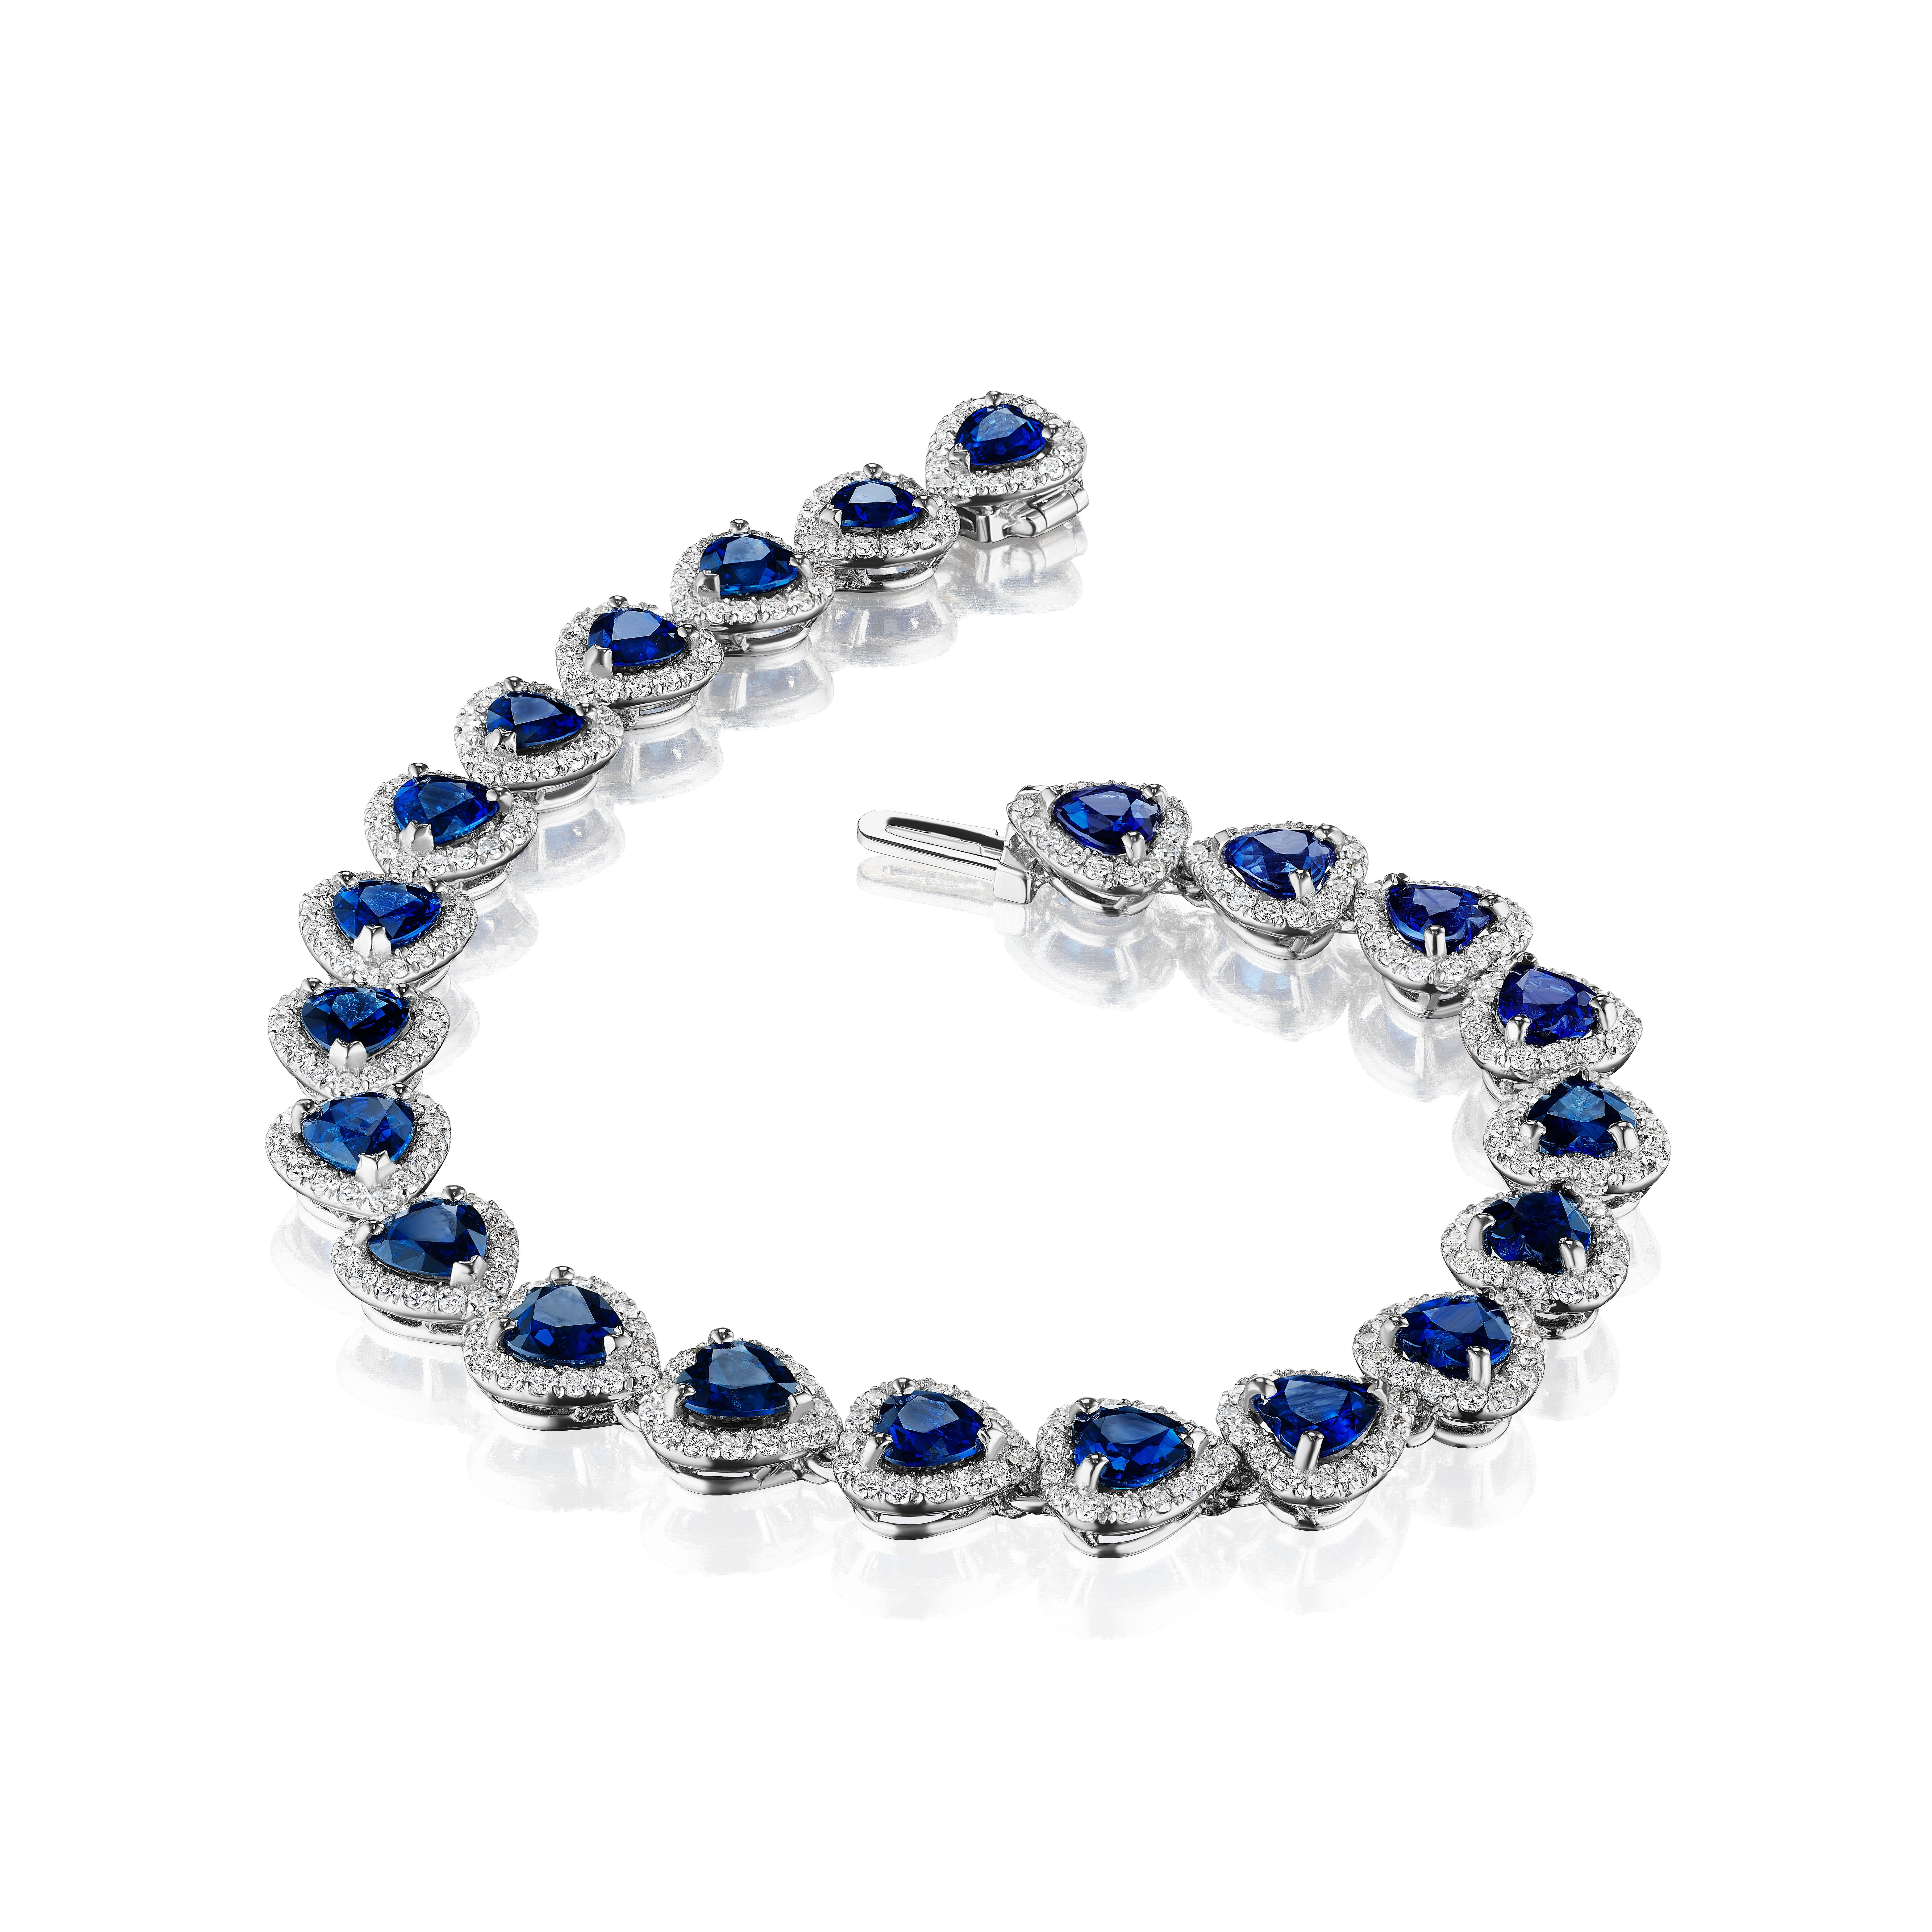 •	18KT White Gold
•	13.86 Carats
•	7’’ Long

•	Number of Heart Shape Sapphires: 22
•	Carat Weight: 11.44ctw

•	Number of Round Diamonds: 330
•	Carat Weight: 2.42ctw

•	This beautiful bracelet contains a row 22 heart shape blue sapphires & white